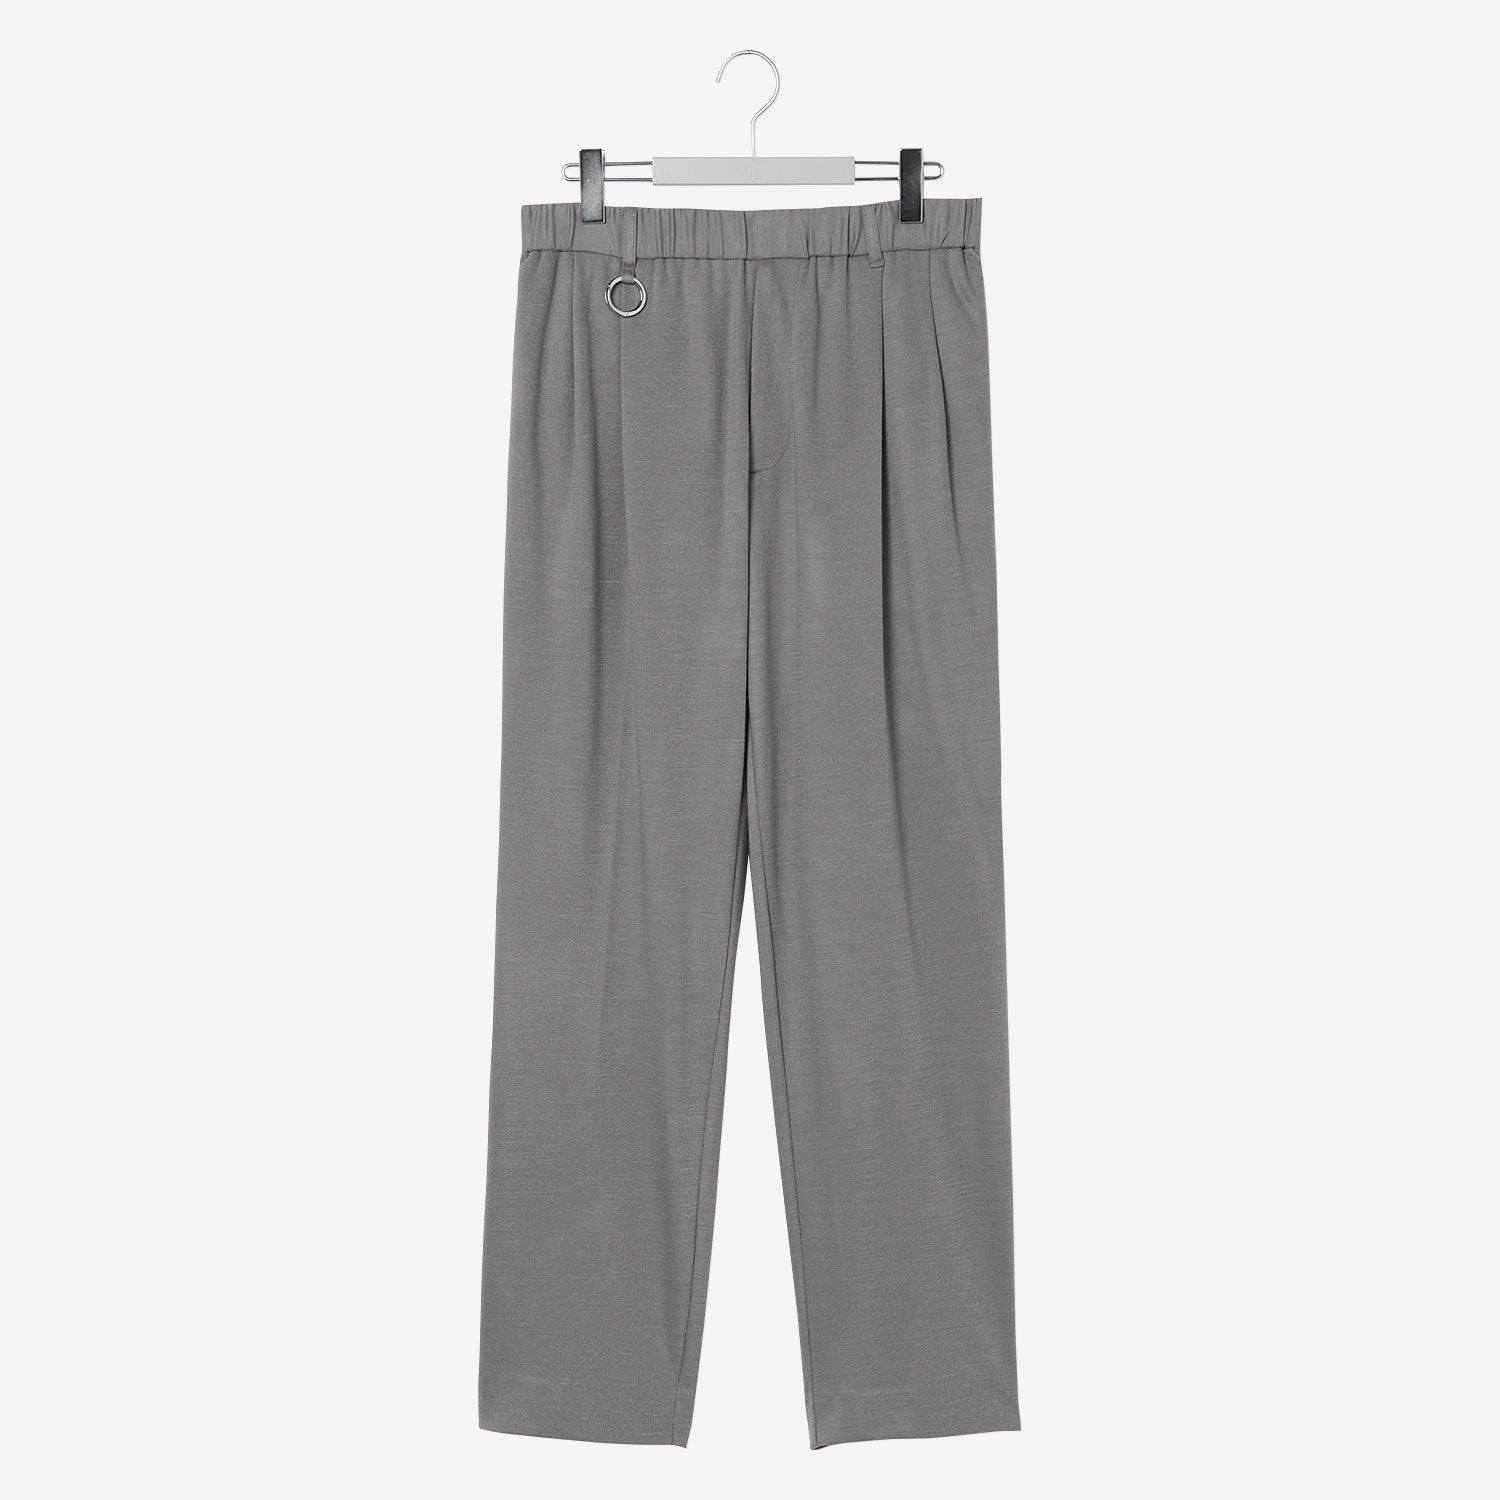 YVES / Tapered Pants / gray